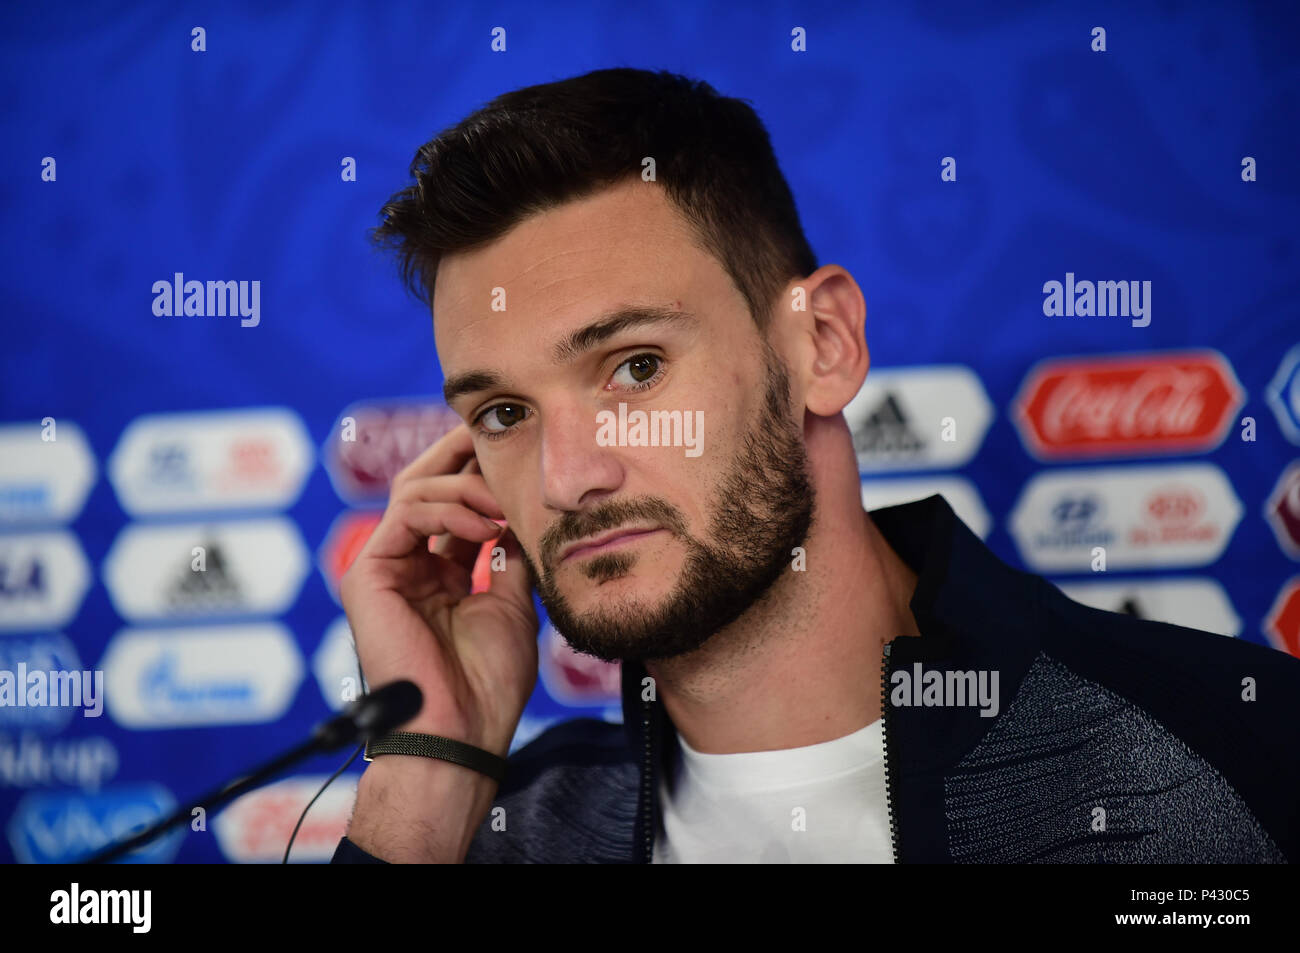 Yekaterinburg, Russia. 20th June, 2018. Goalkeeper Hugo Lloris of France attends a press conference during the 2018 FIFA World Cup in Yekaterinburg, Russia, on June 20, 2018. Credit: Du Yu/Xinhua/Alamy Live News Stock Photo